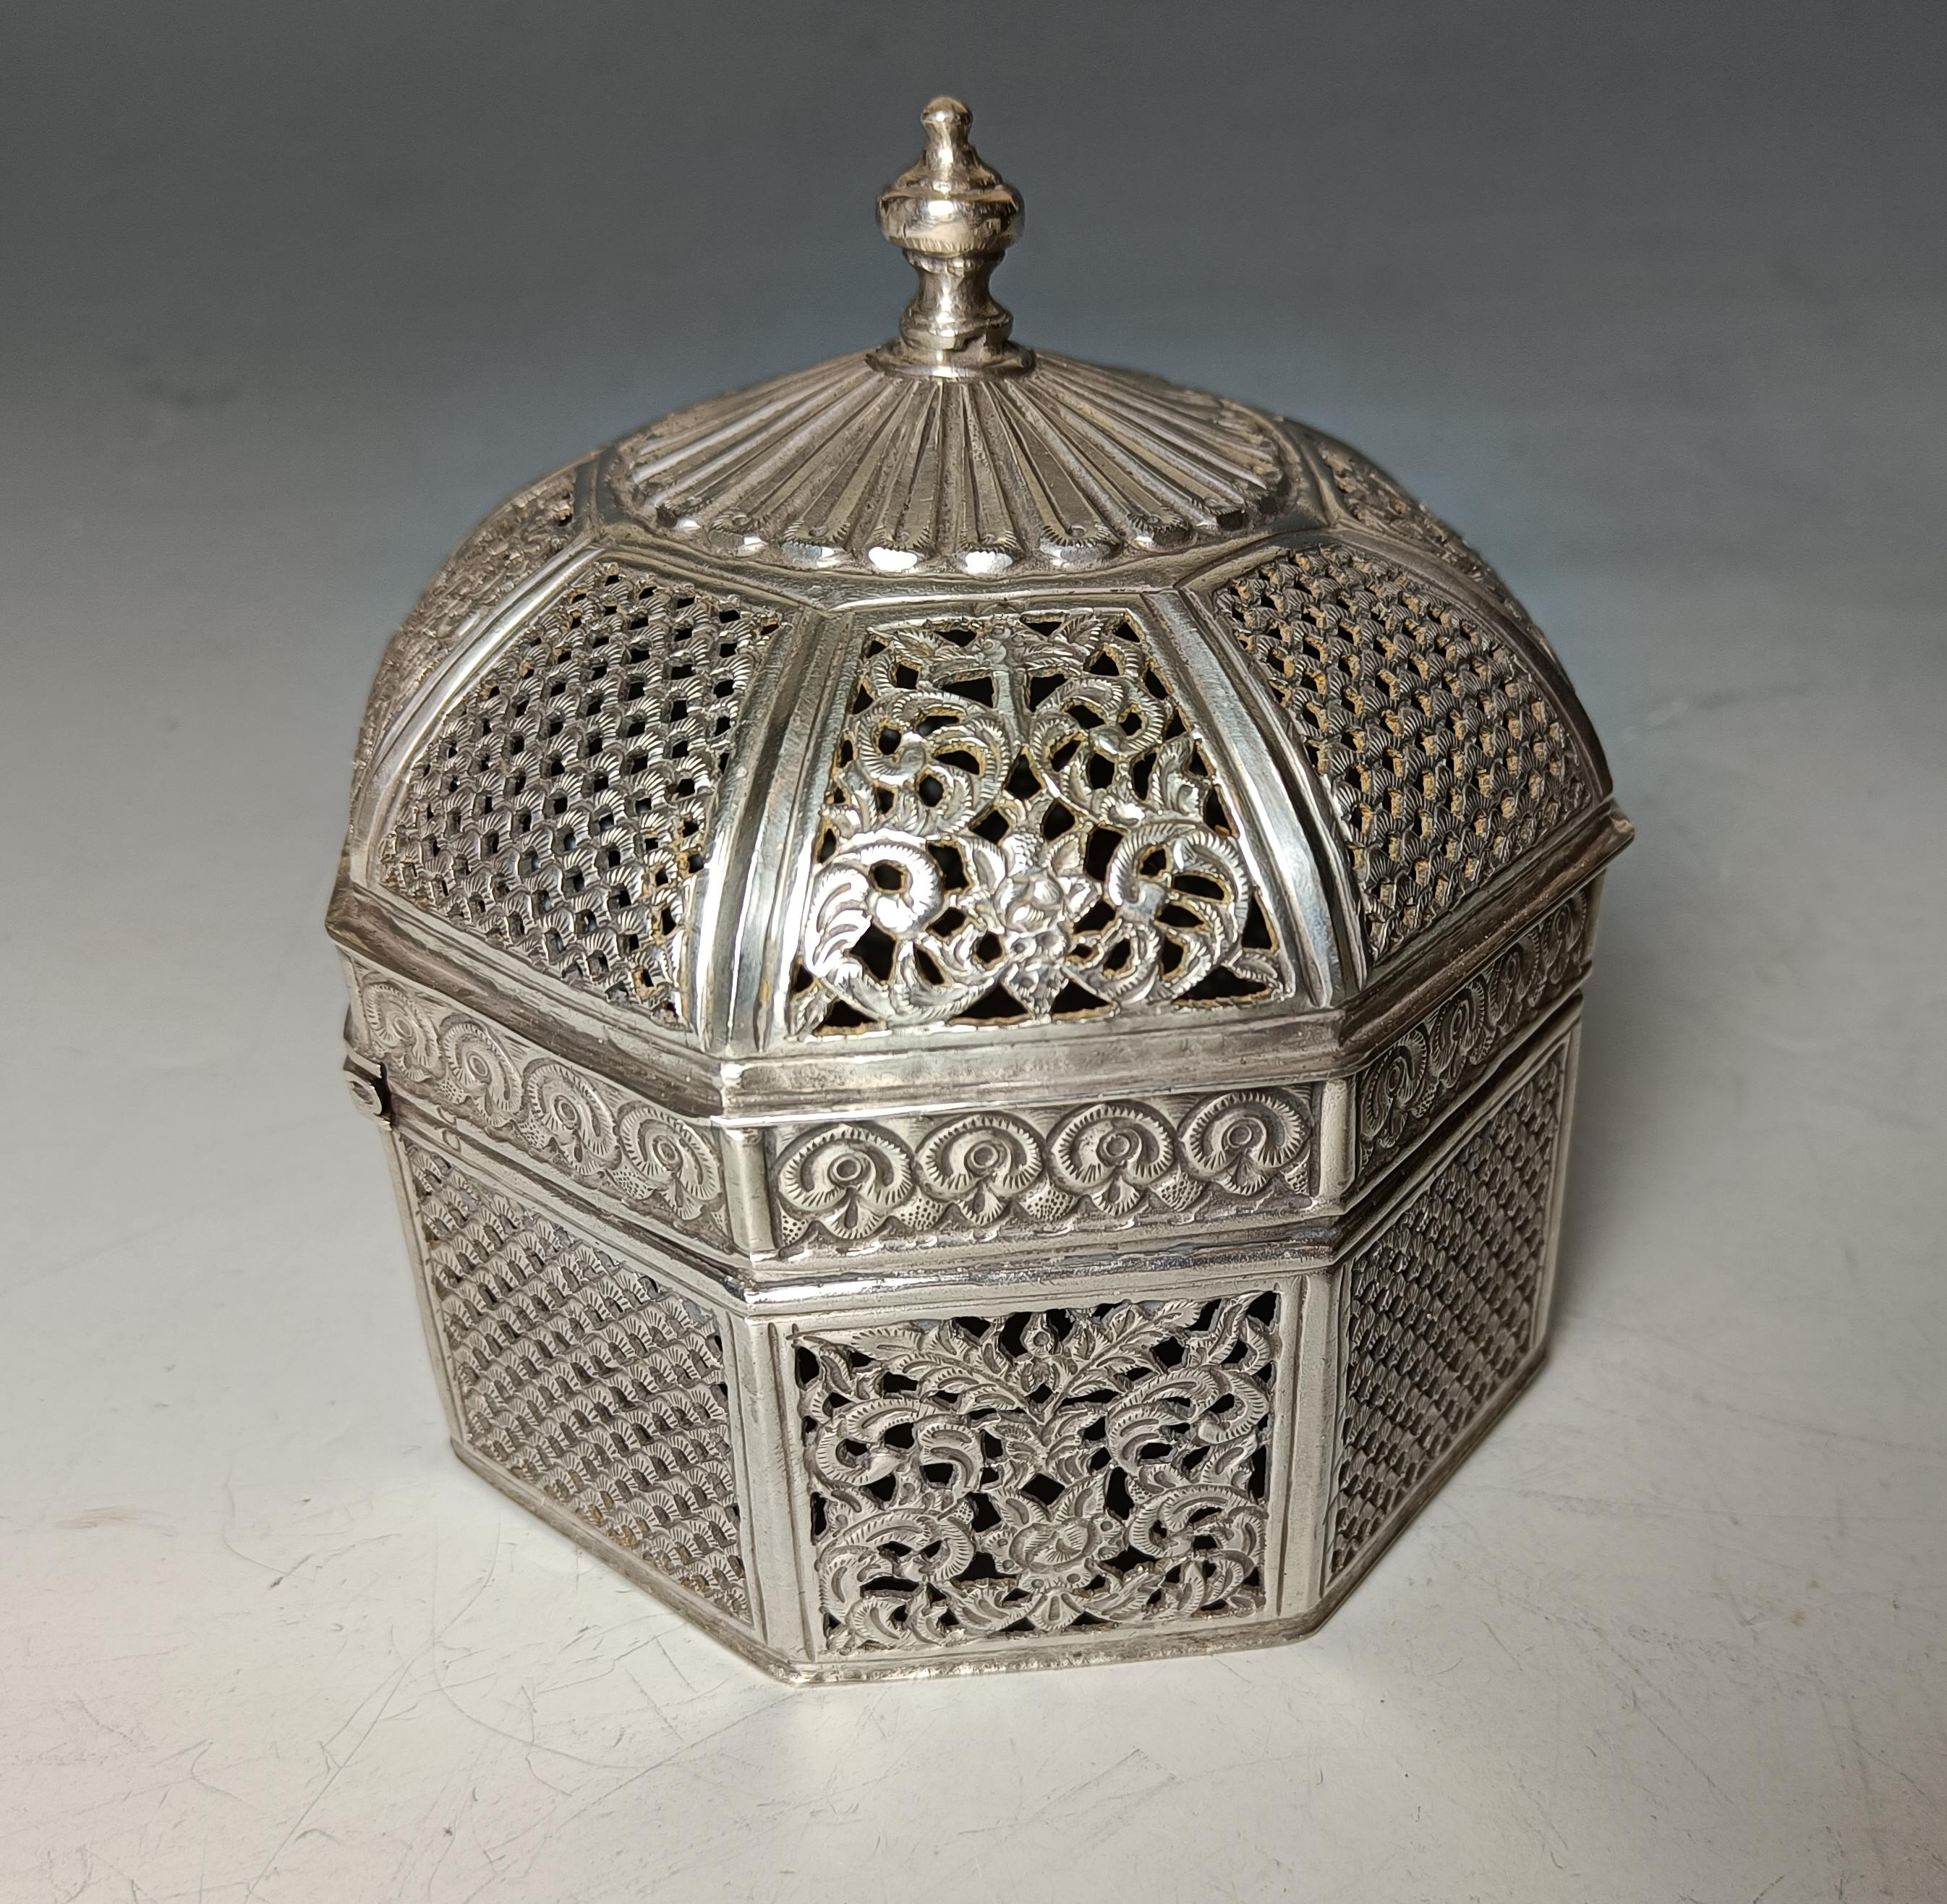 Superb large Indian mughal style repoussé and pierced silver box.
A beautiful Octagonal  silver box with domed top with pierced  floral design and fine geometric repousse embossed and chiselled  decoration the domed lid which rises to a pointed